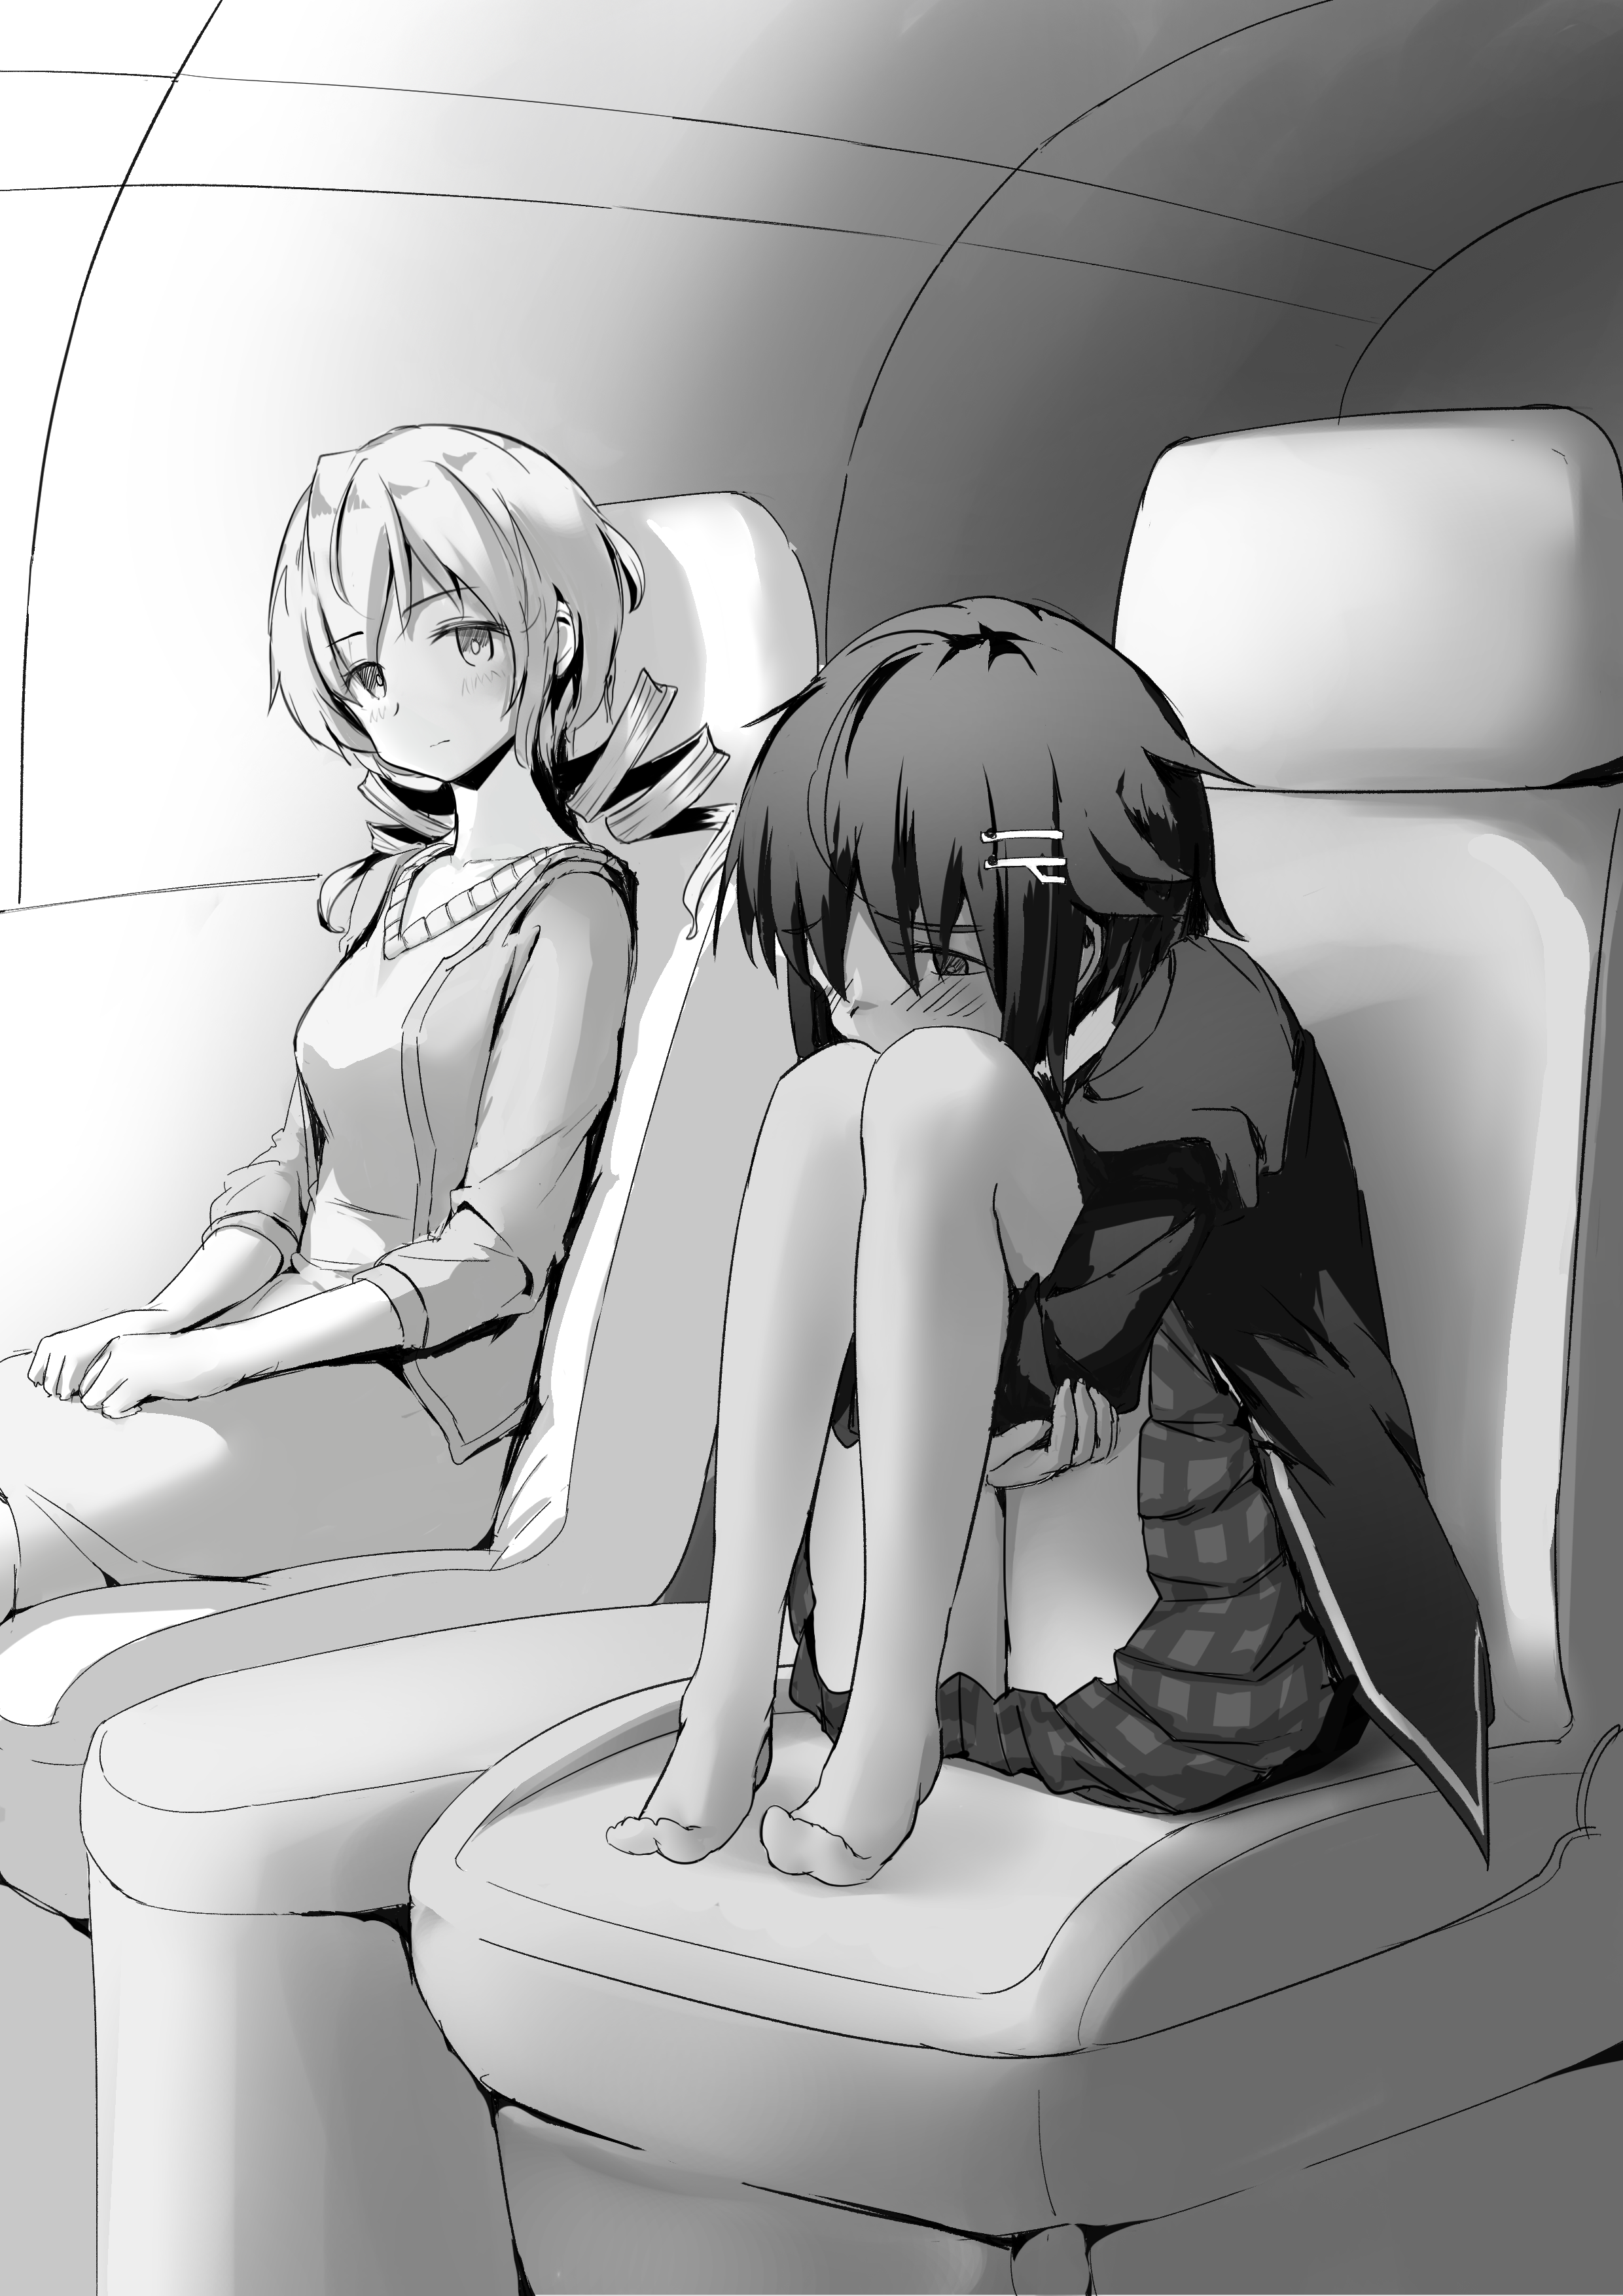 Simona is sad in car with Mami (by toxiguest)